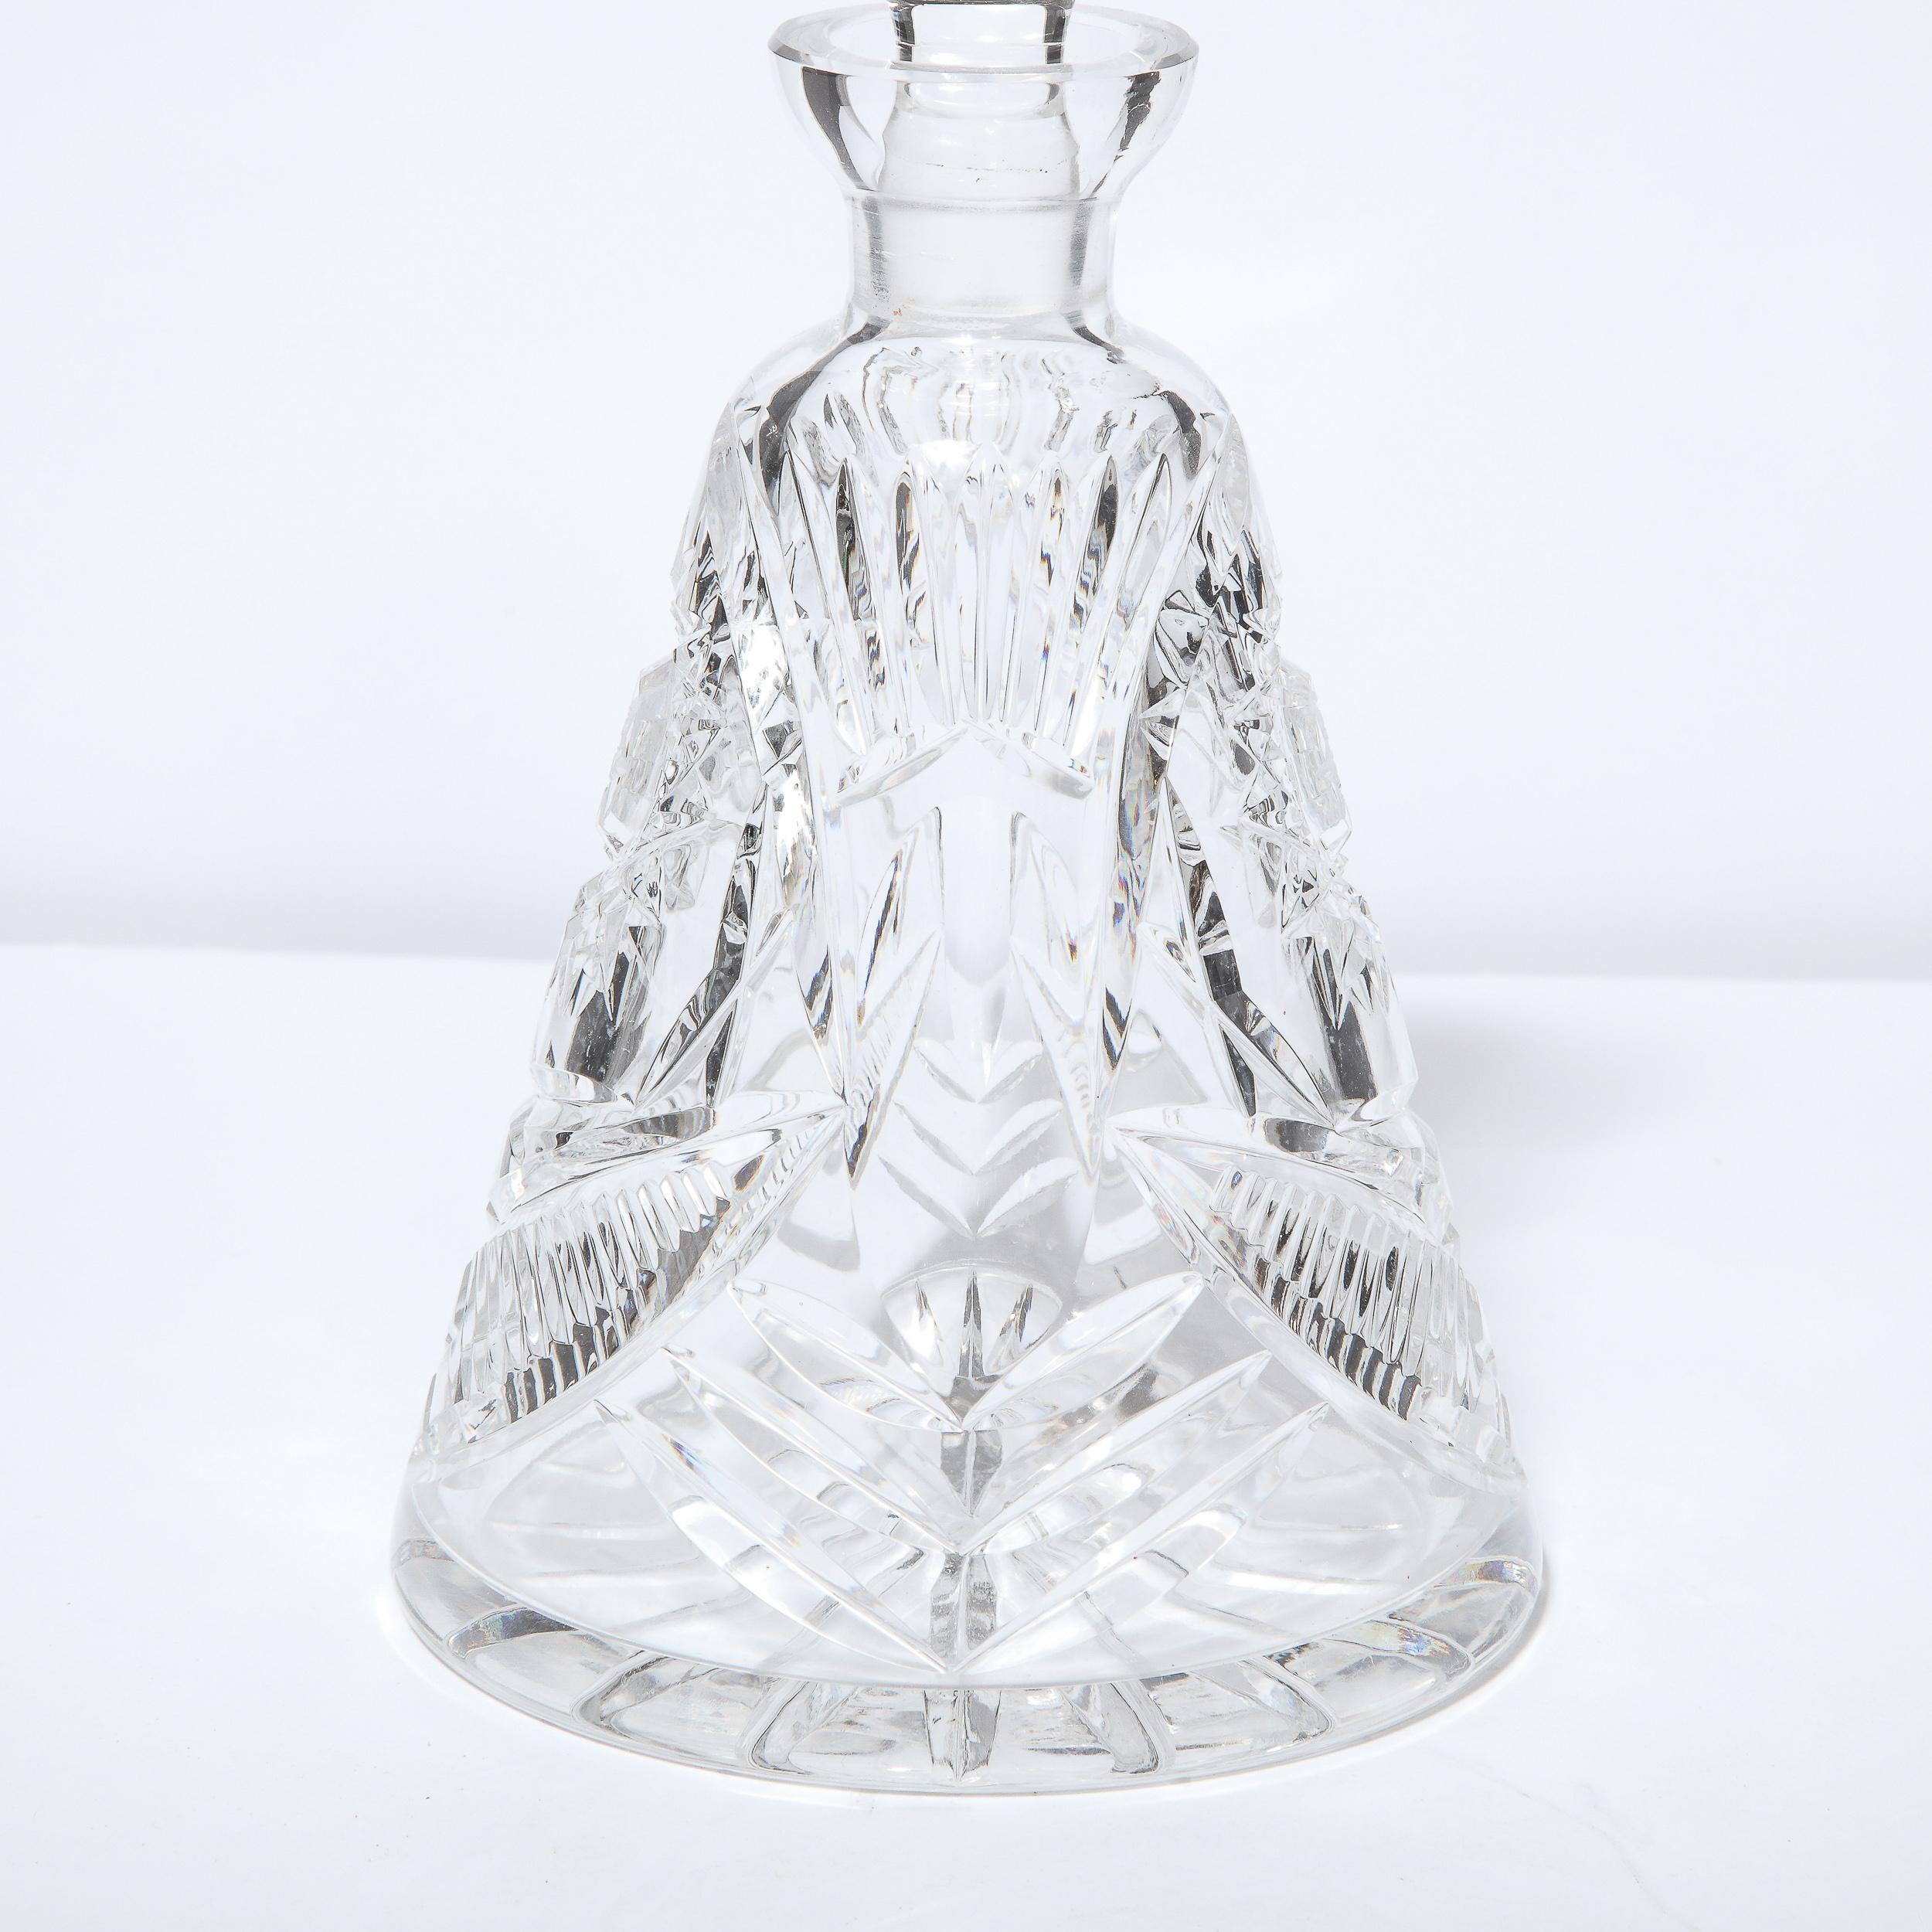 Mid-Century Modern Translucent Etched Crystal Decanter with Geometric Patterns 1